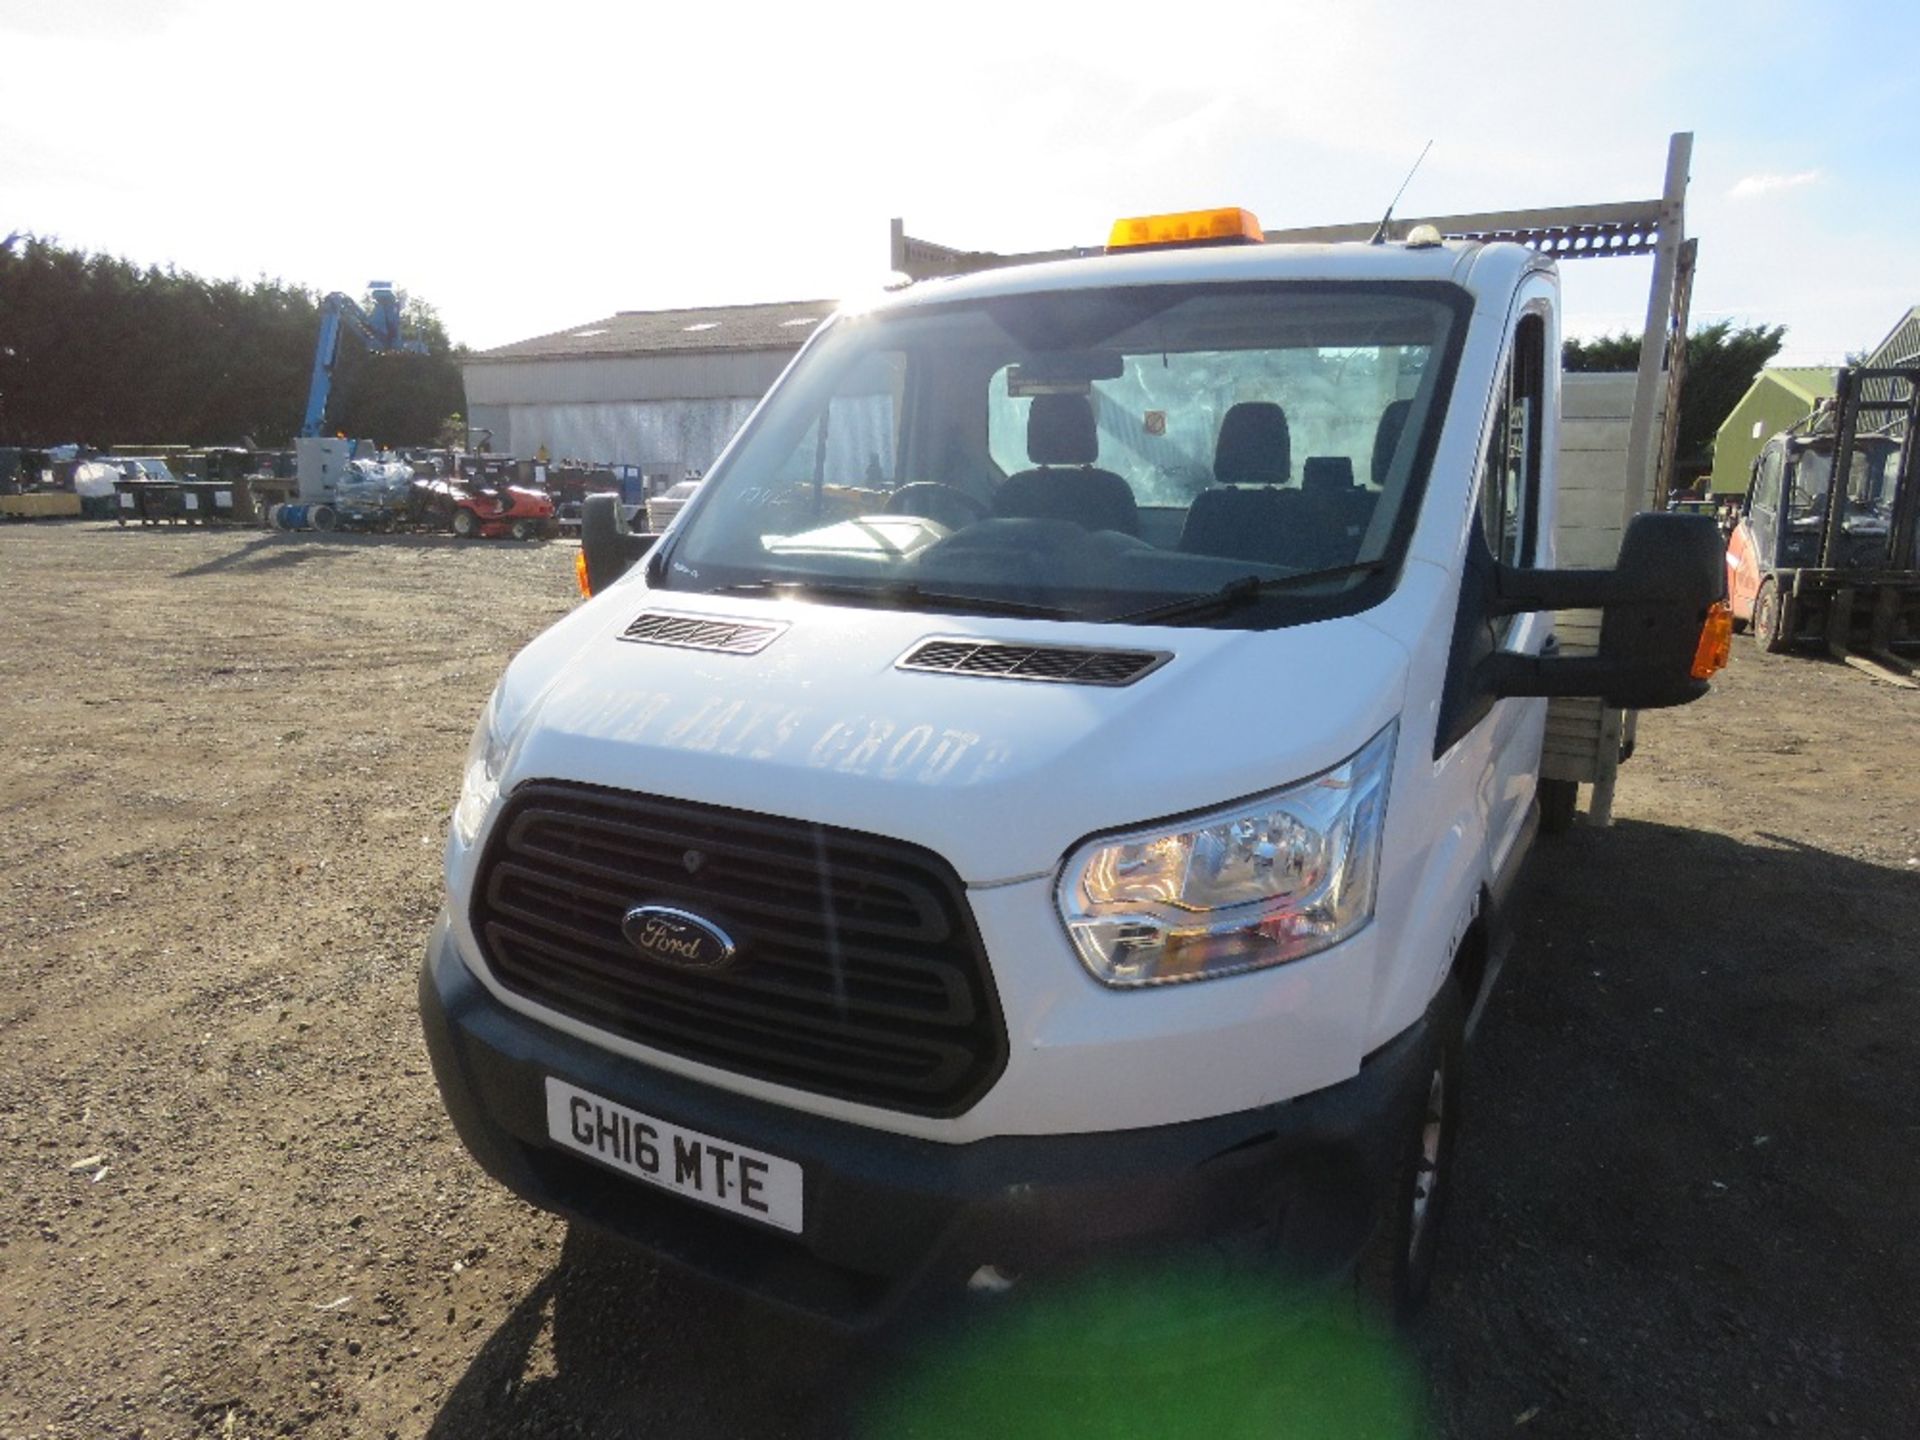 FORD TRANSIT 350 FLAT BED PICKUP TRUCK WITH REAR TAIL LIFT REG:GH16 MTE. WITH V5, OWNED BY VENDOR FR - Image 4 of 13